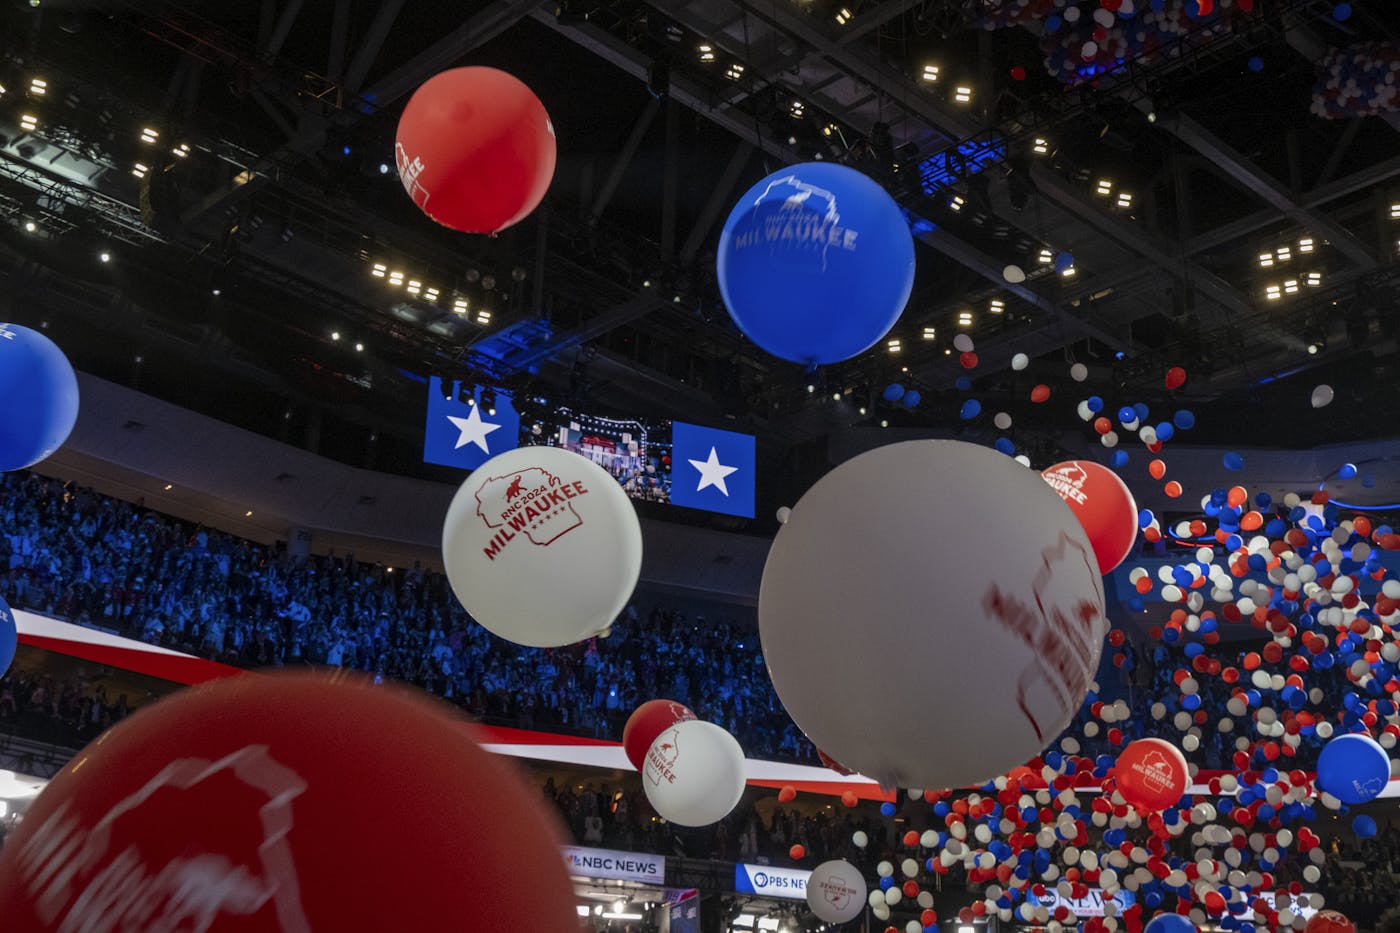 A photograph of the crowed during the balloon drop at the Republication National Convention 